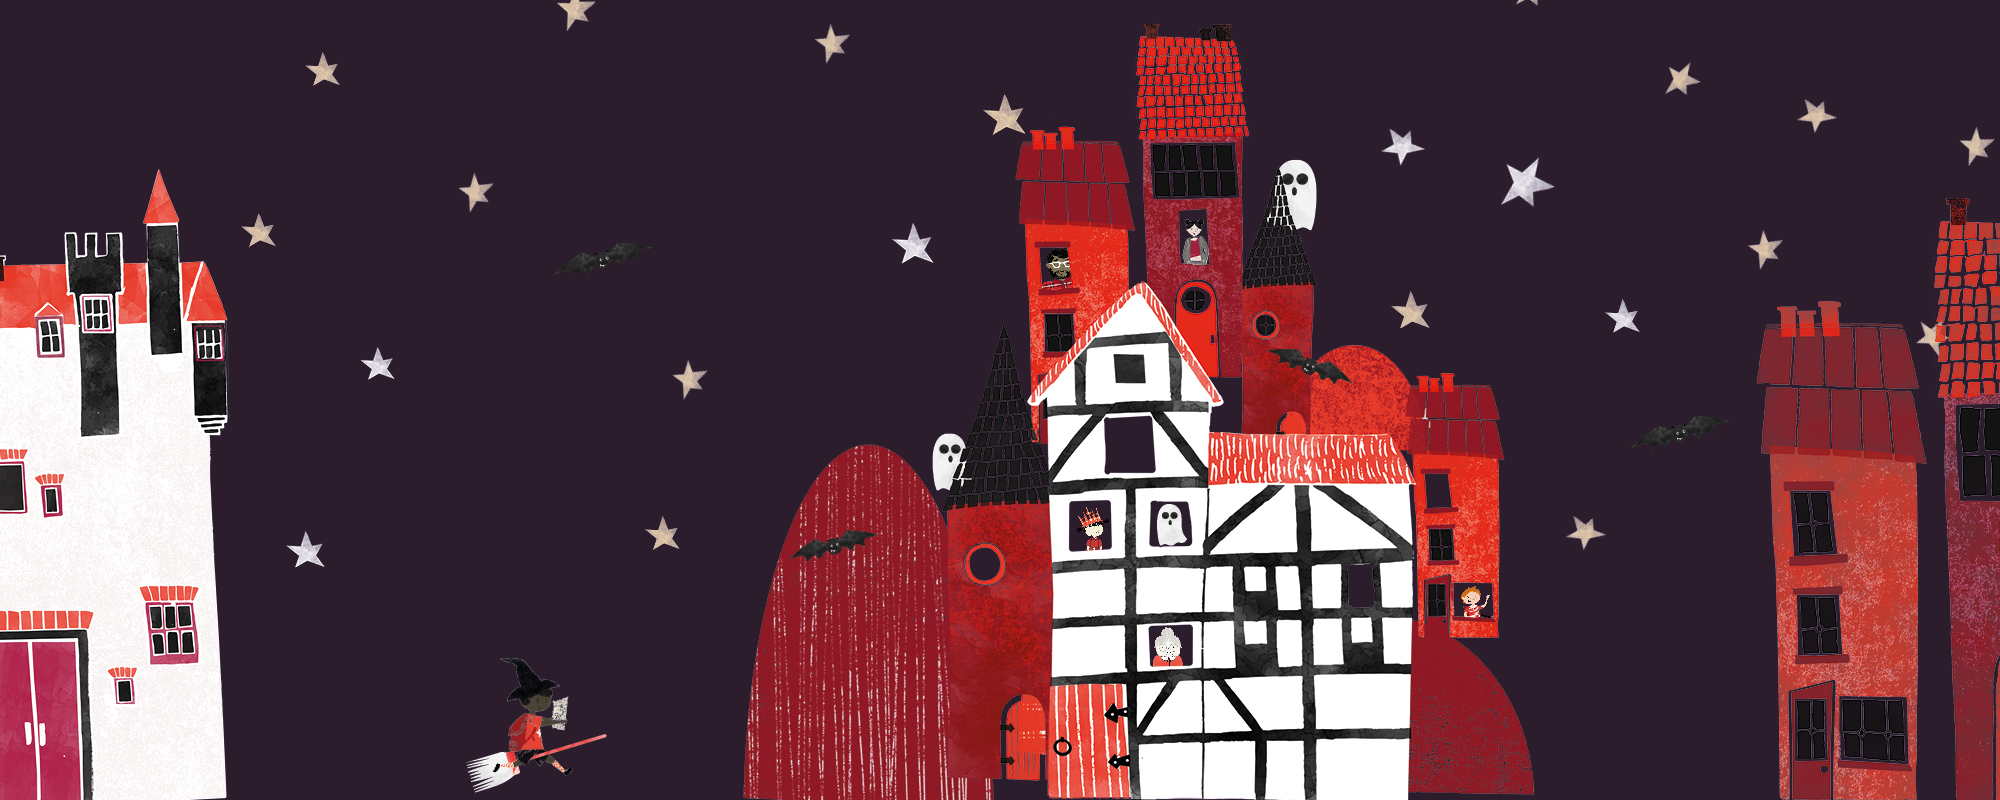 Cartoon of a house with ghost, stars, bats and witches